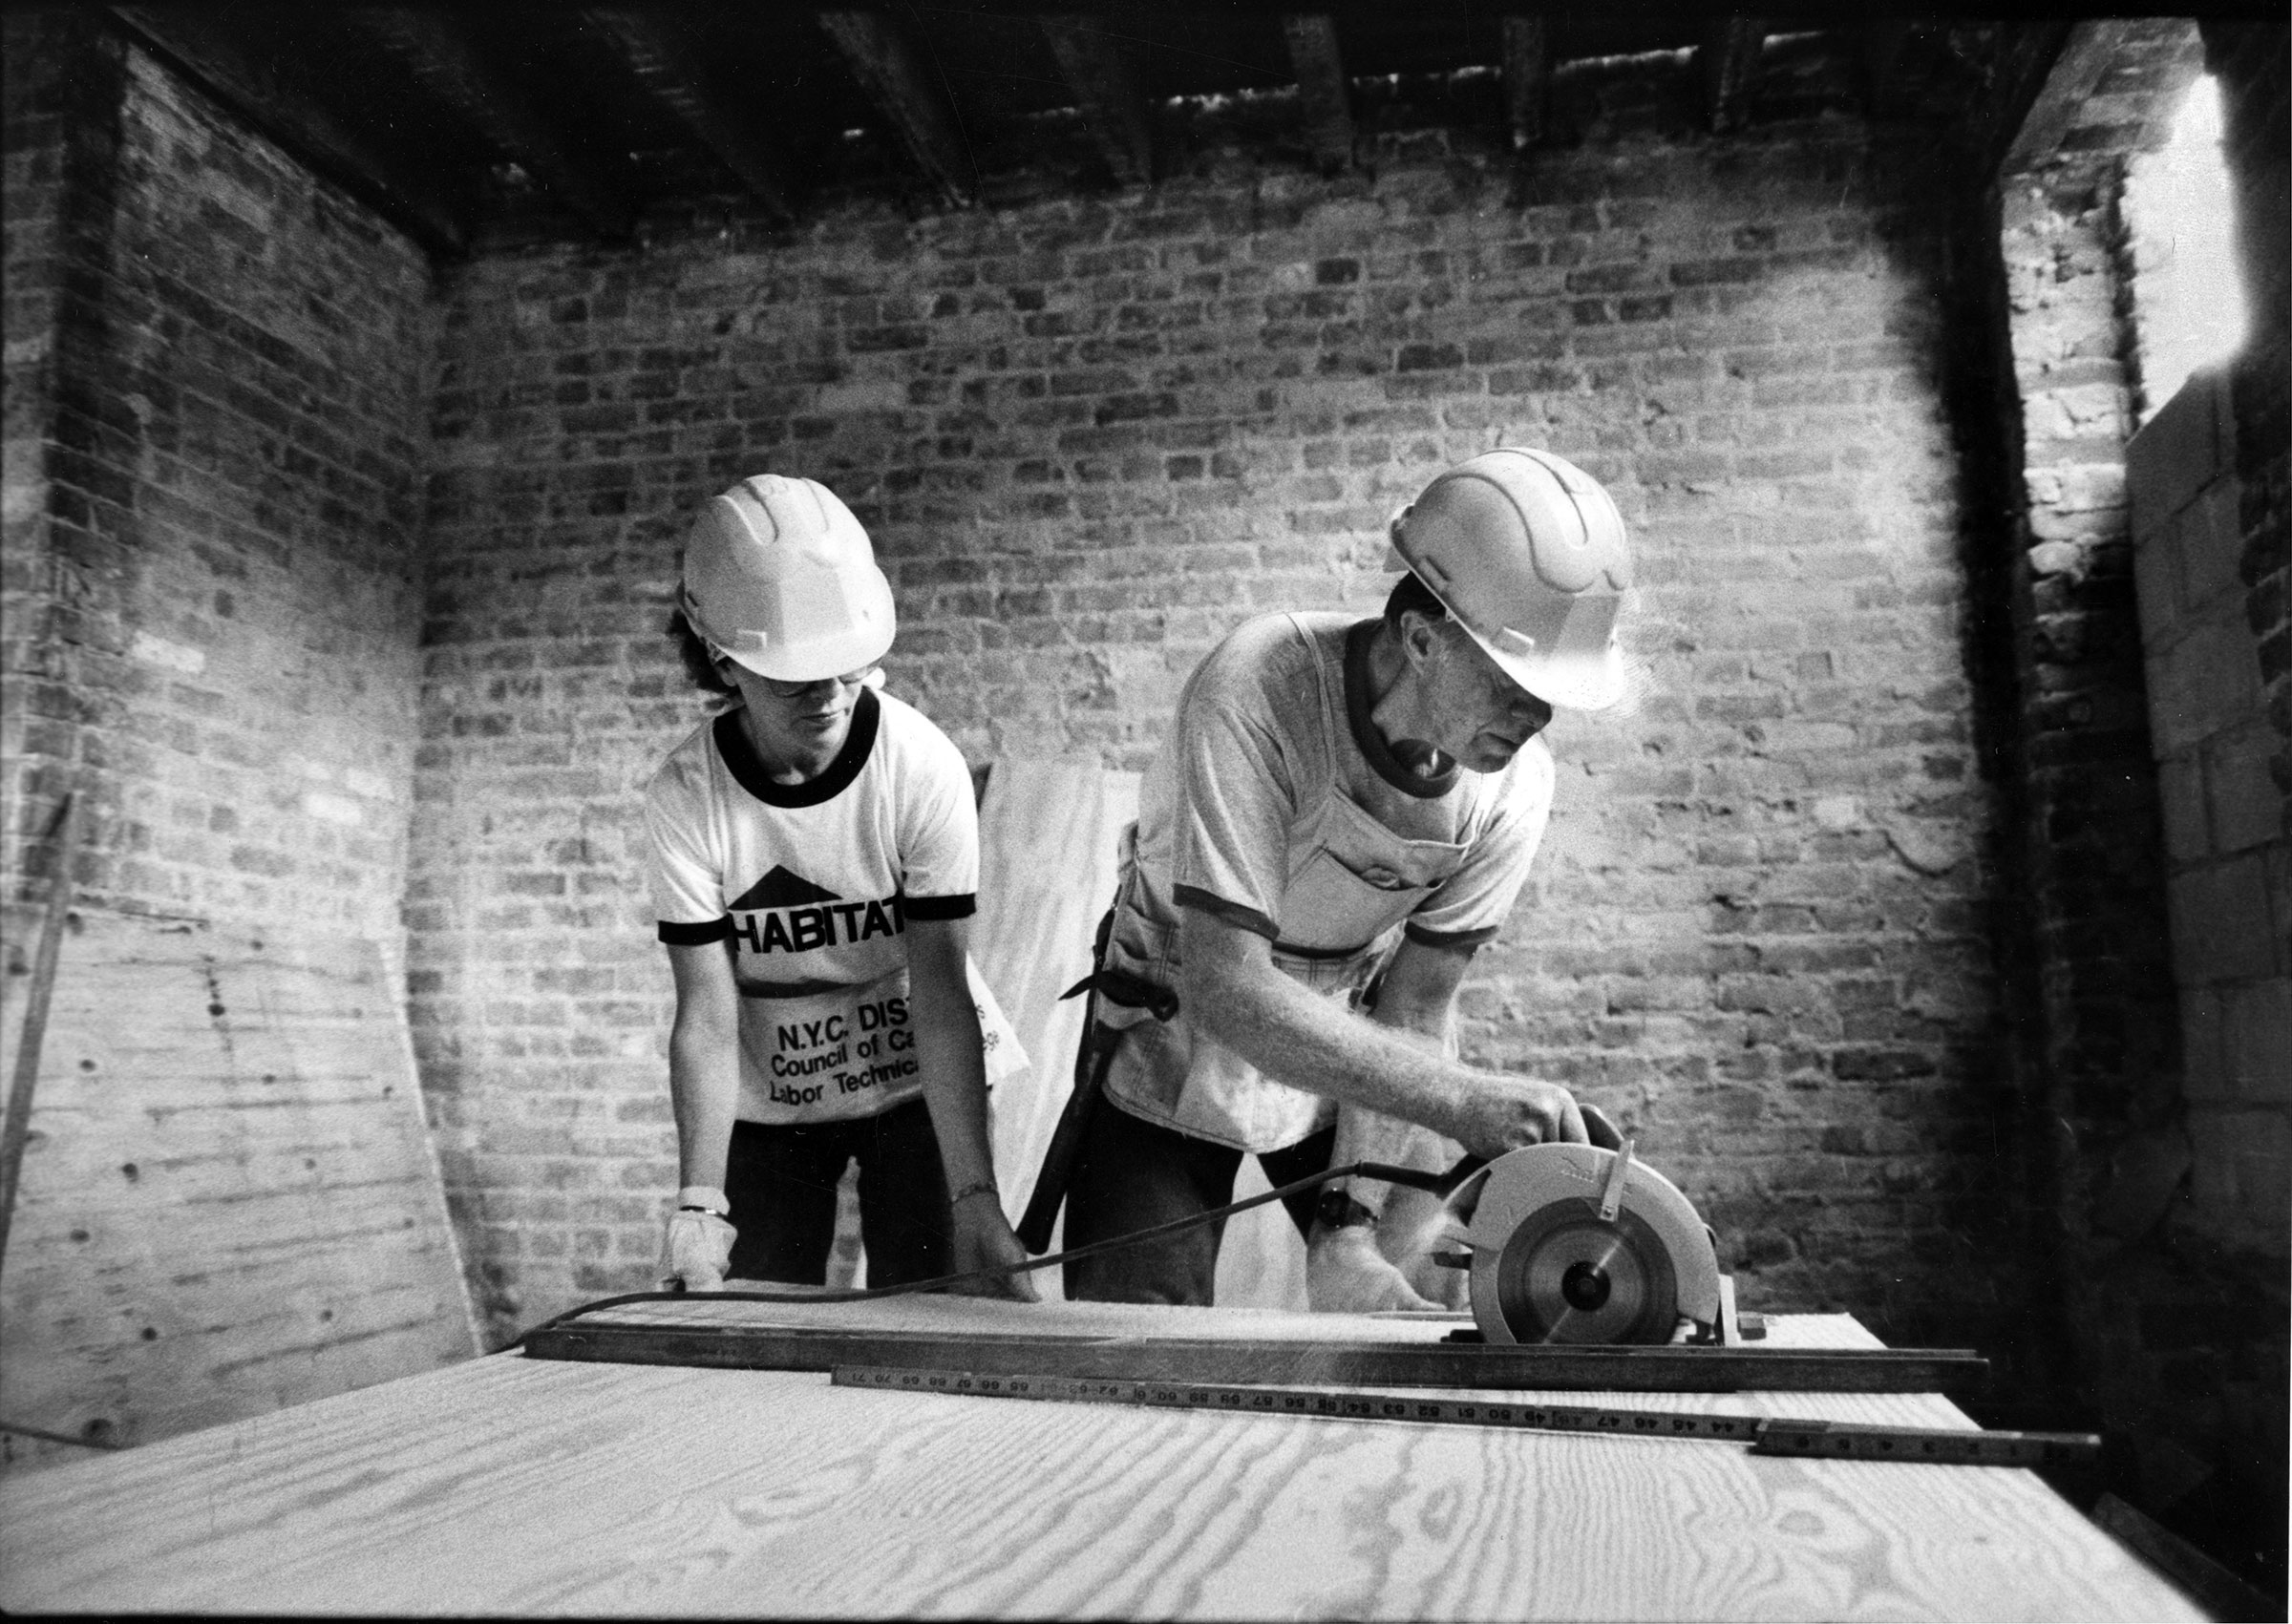 Jimmy and Rosalynn Carter working on a building renovation for Project Habitat for Humanity on the Lower East Side, NY in 1984. (Evelyn Floret—The LIFE Images Collection/Getty Images)